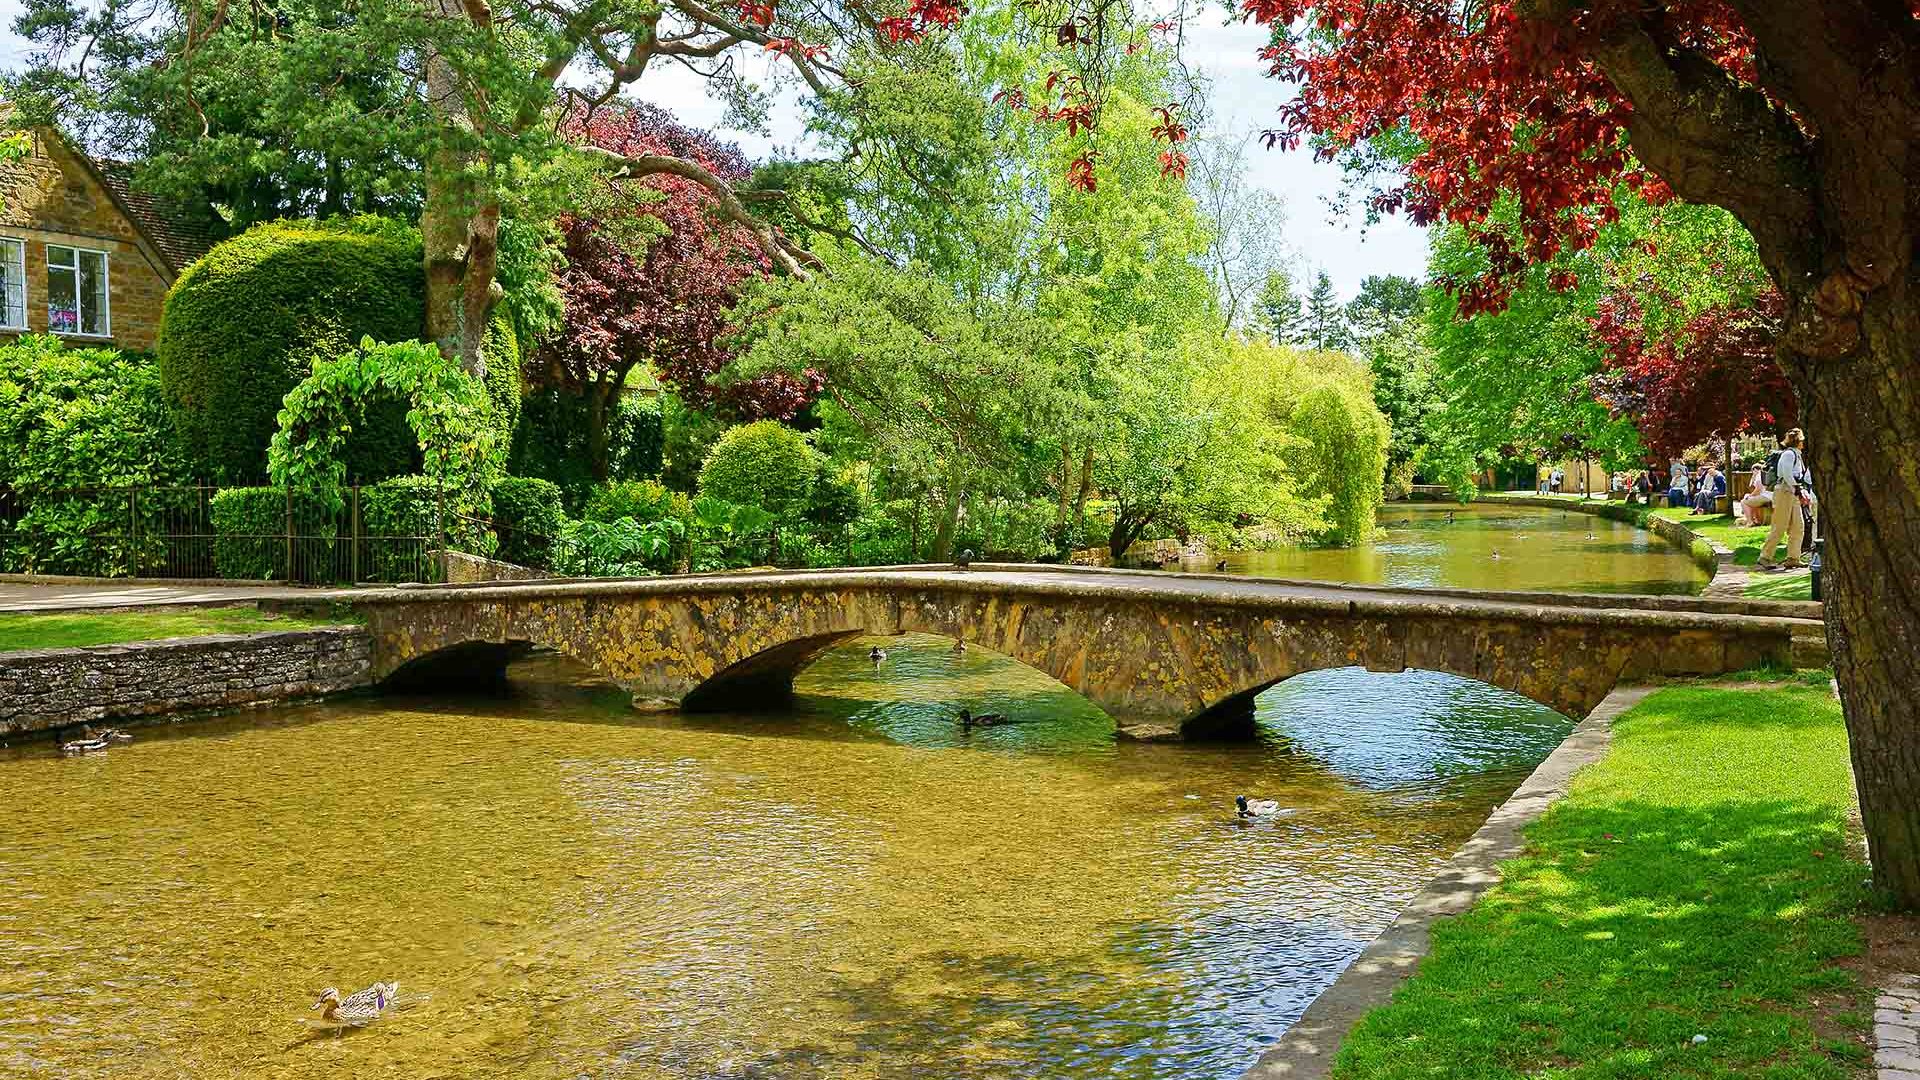 Bourton on the water also known as the Venice of the Cotswolds